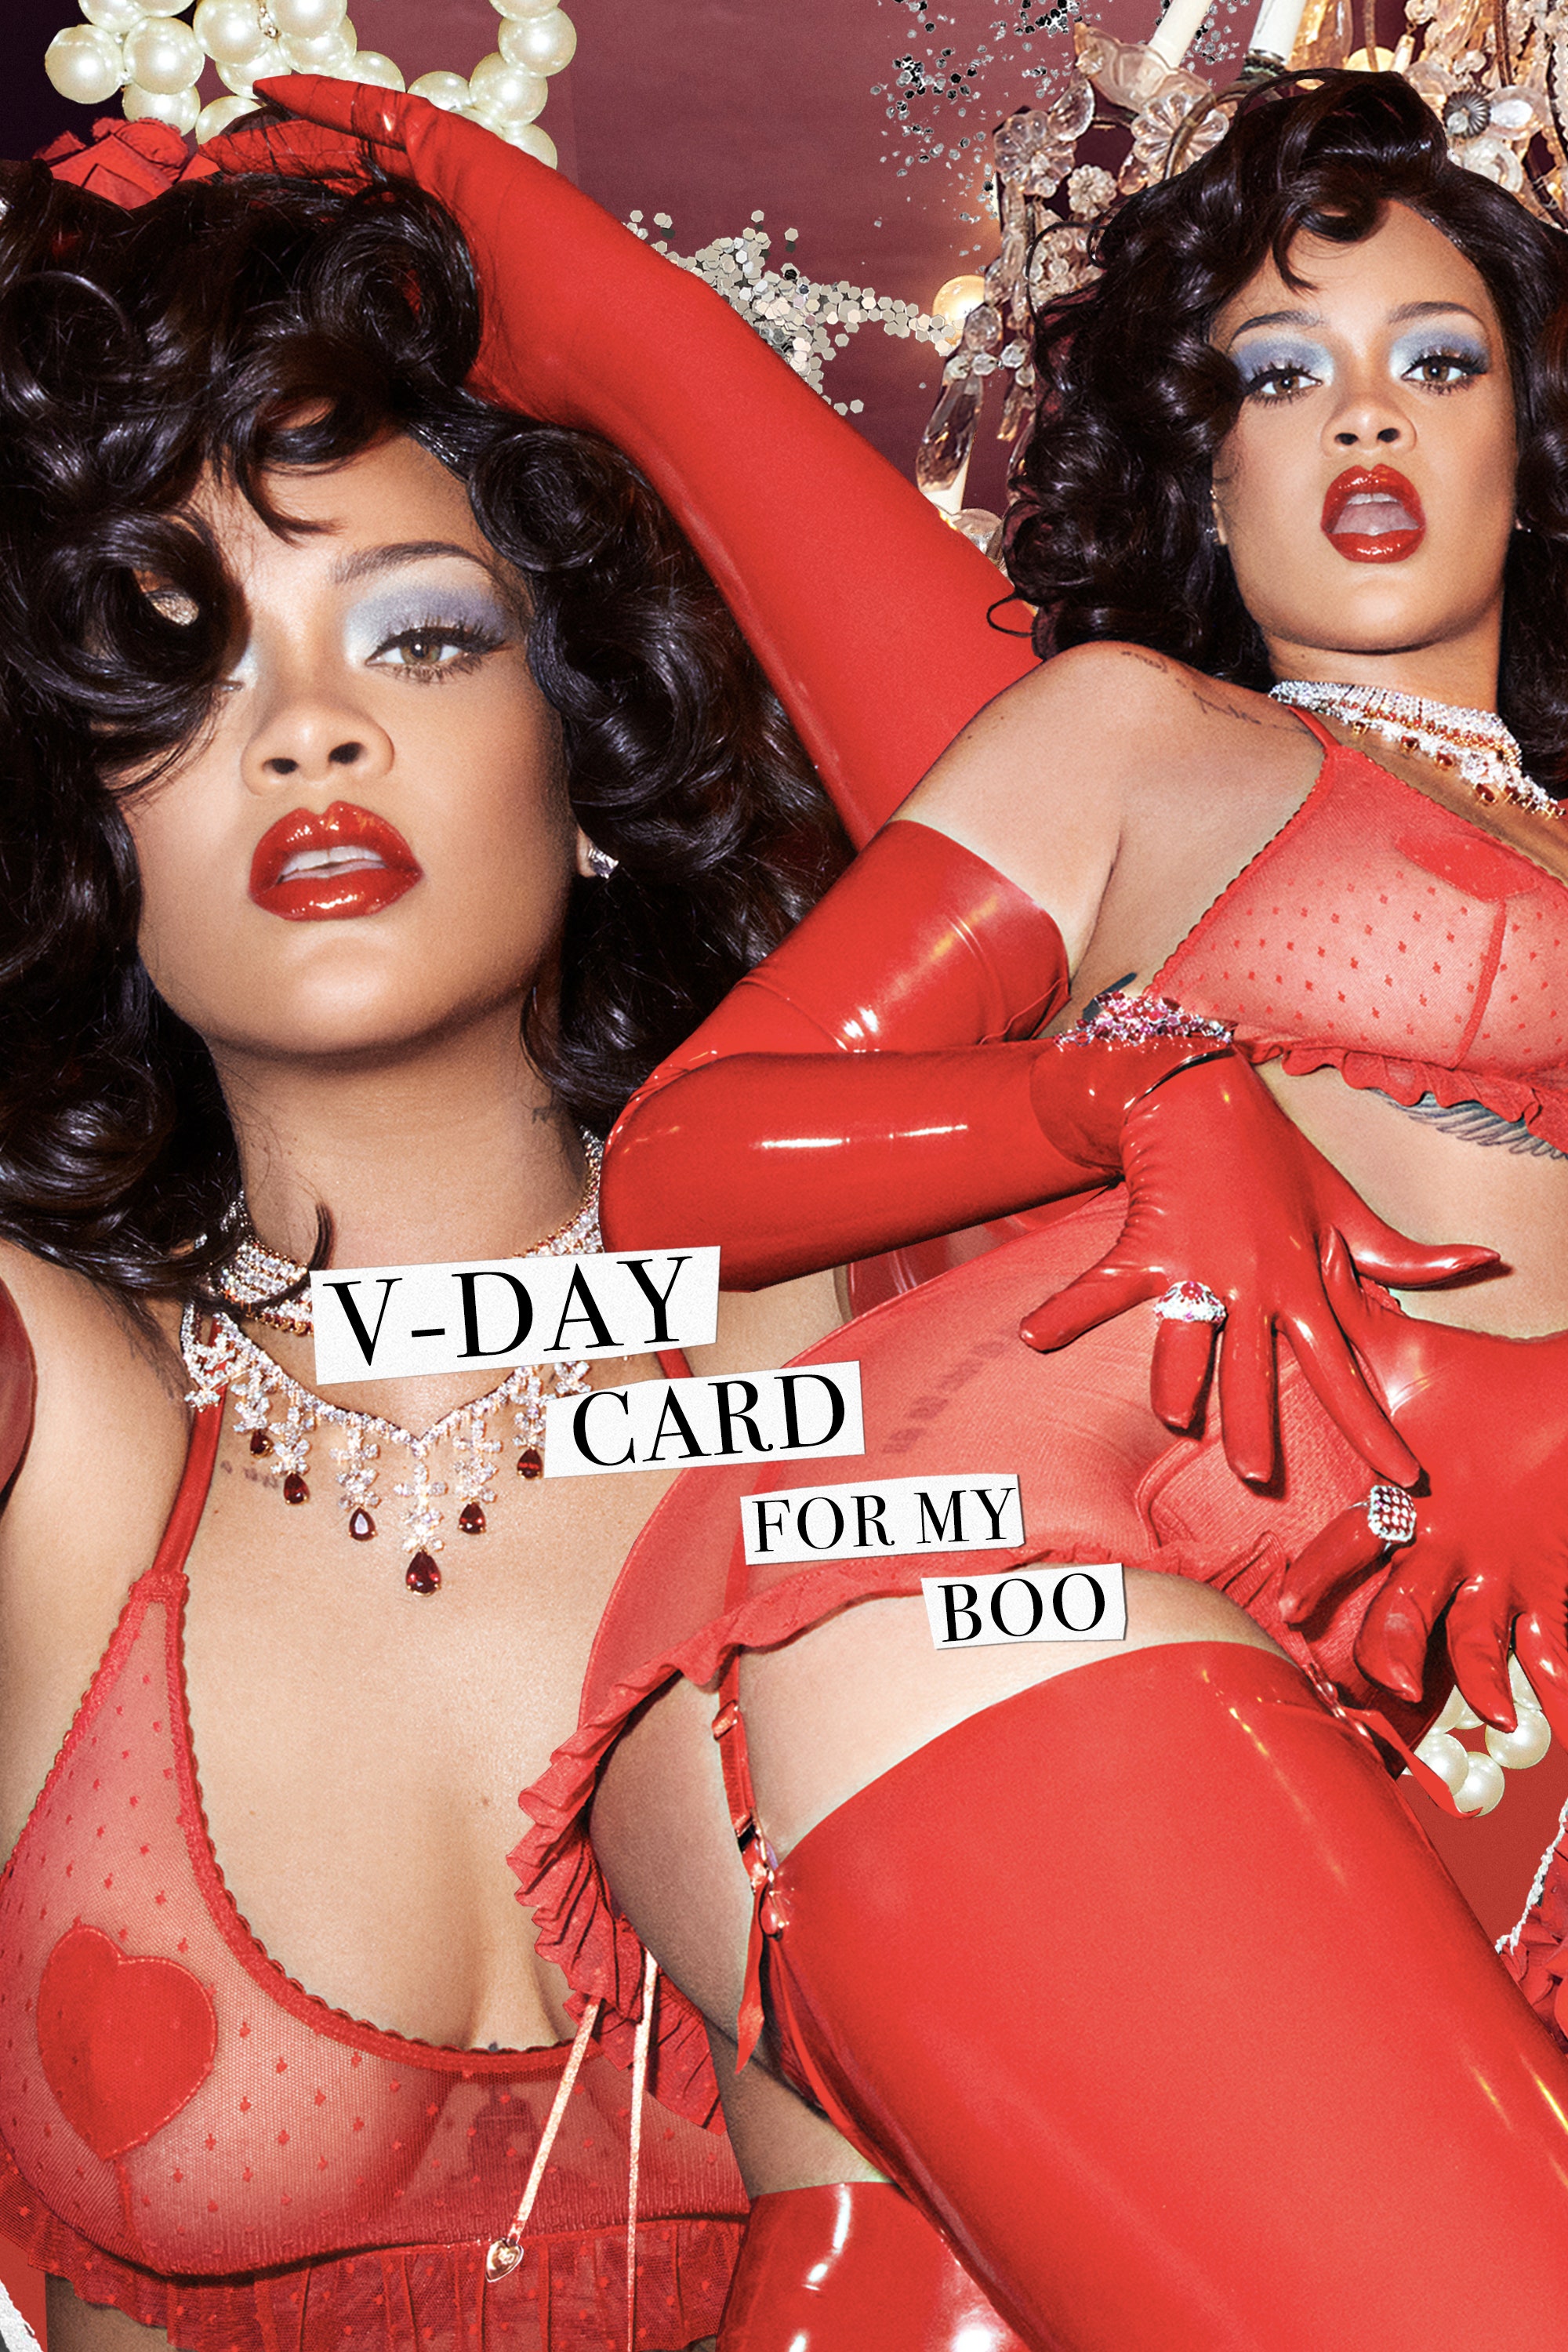 Rihanna Wants To Be Your Valentine! - Photo 4